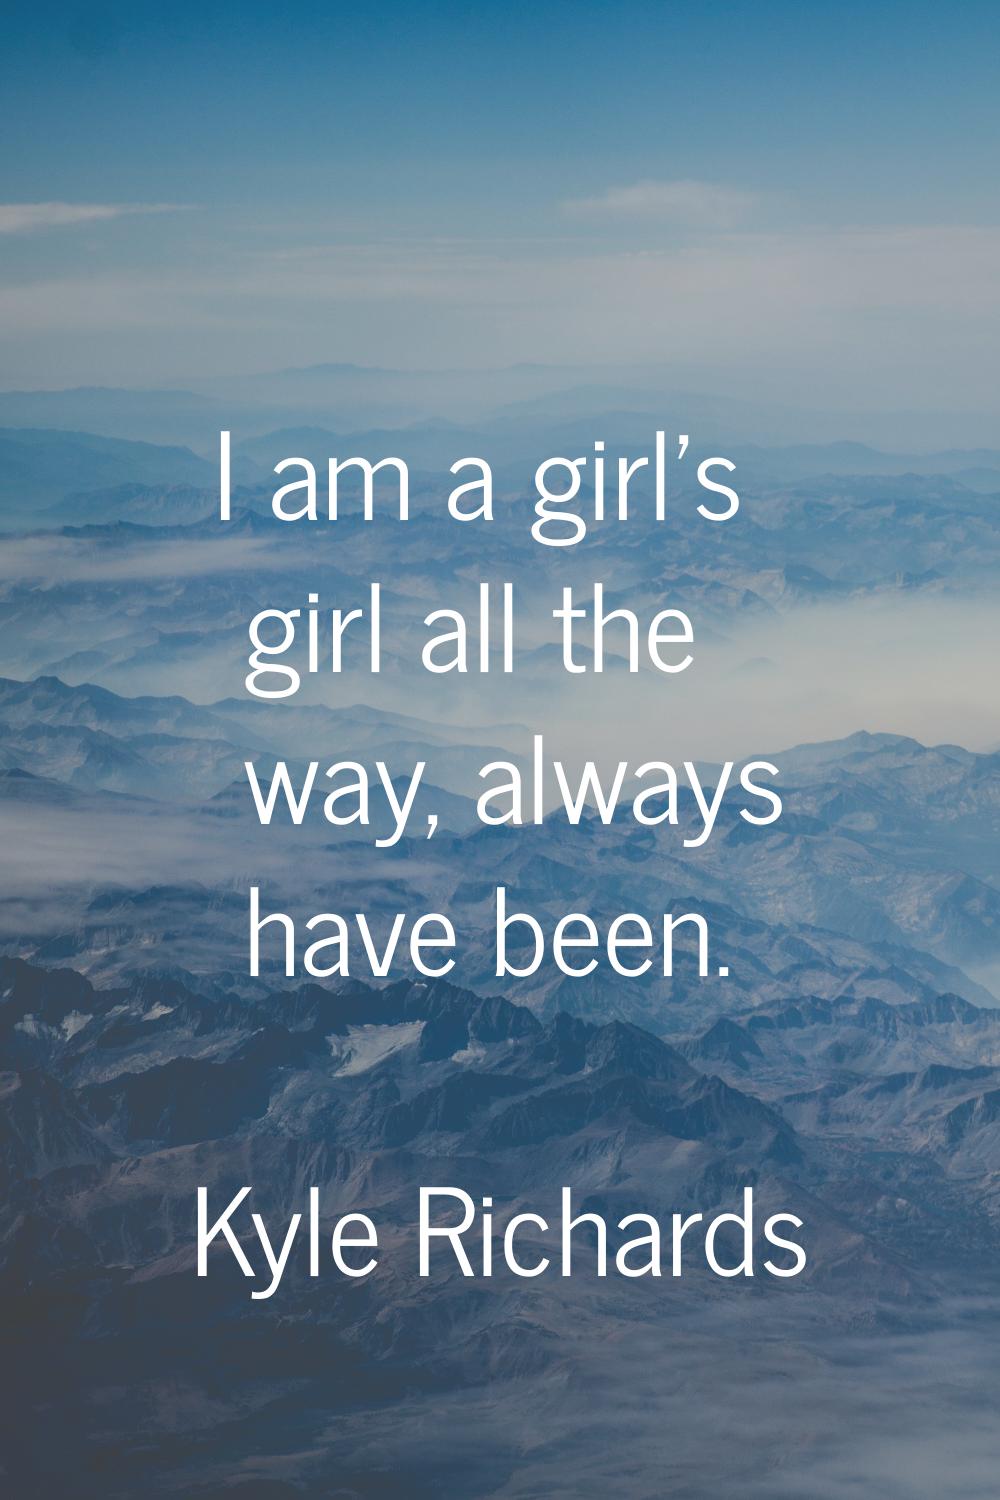 I am a girl's girl all the way, always have been.